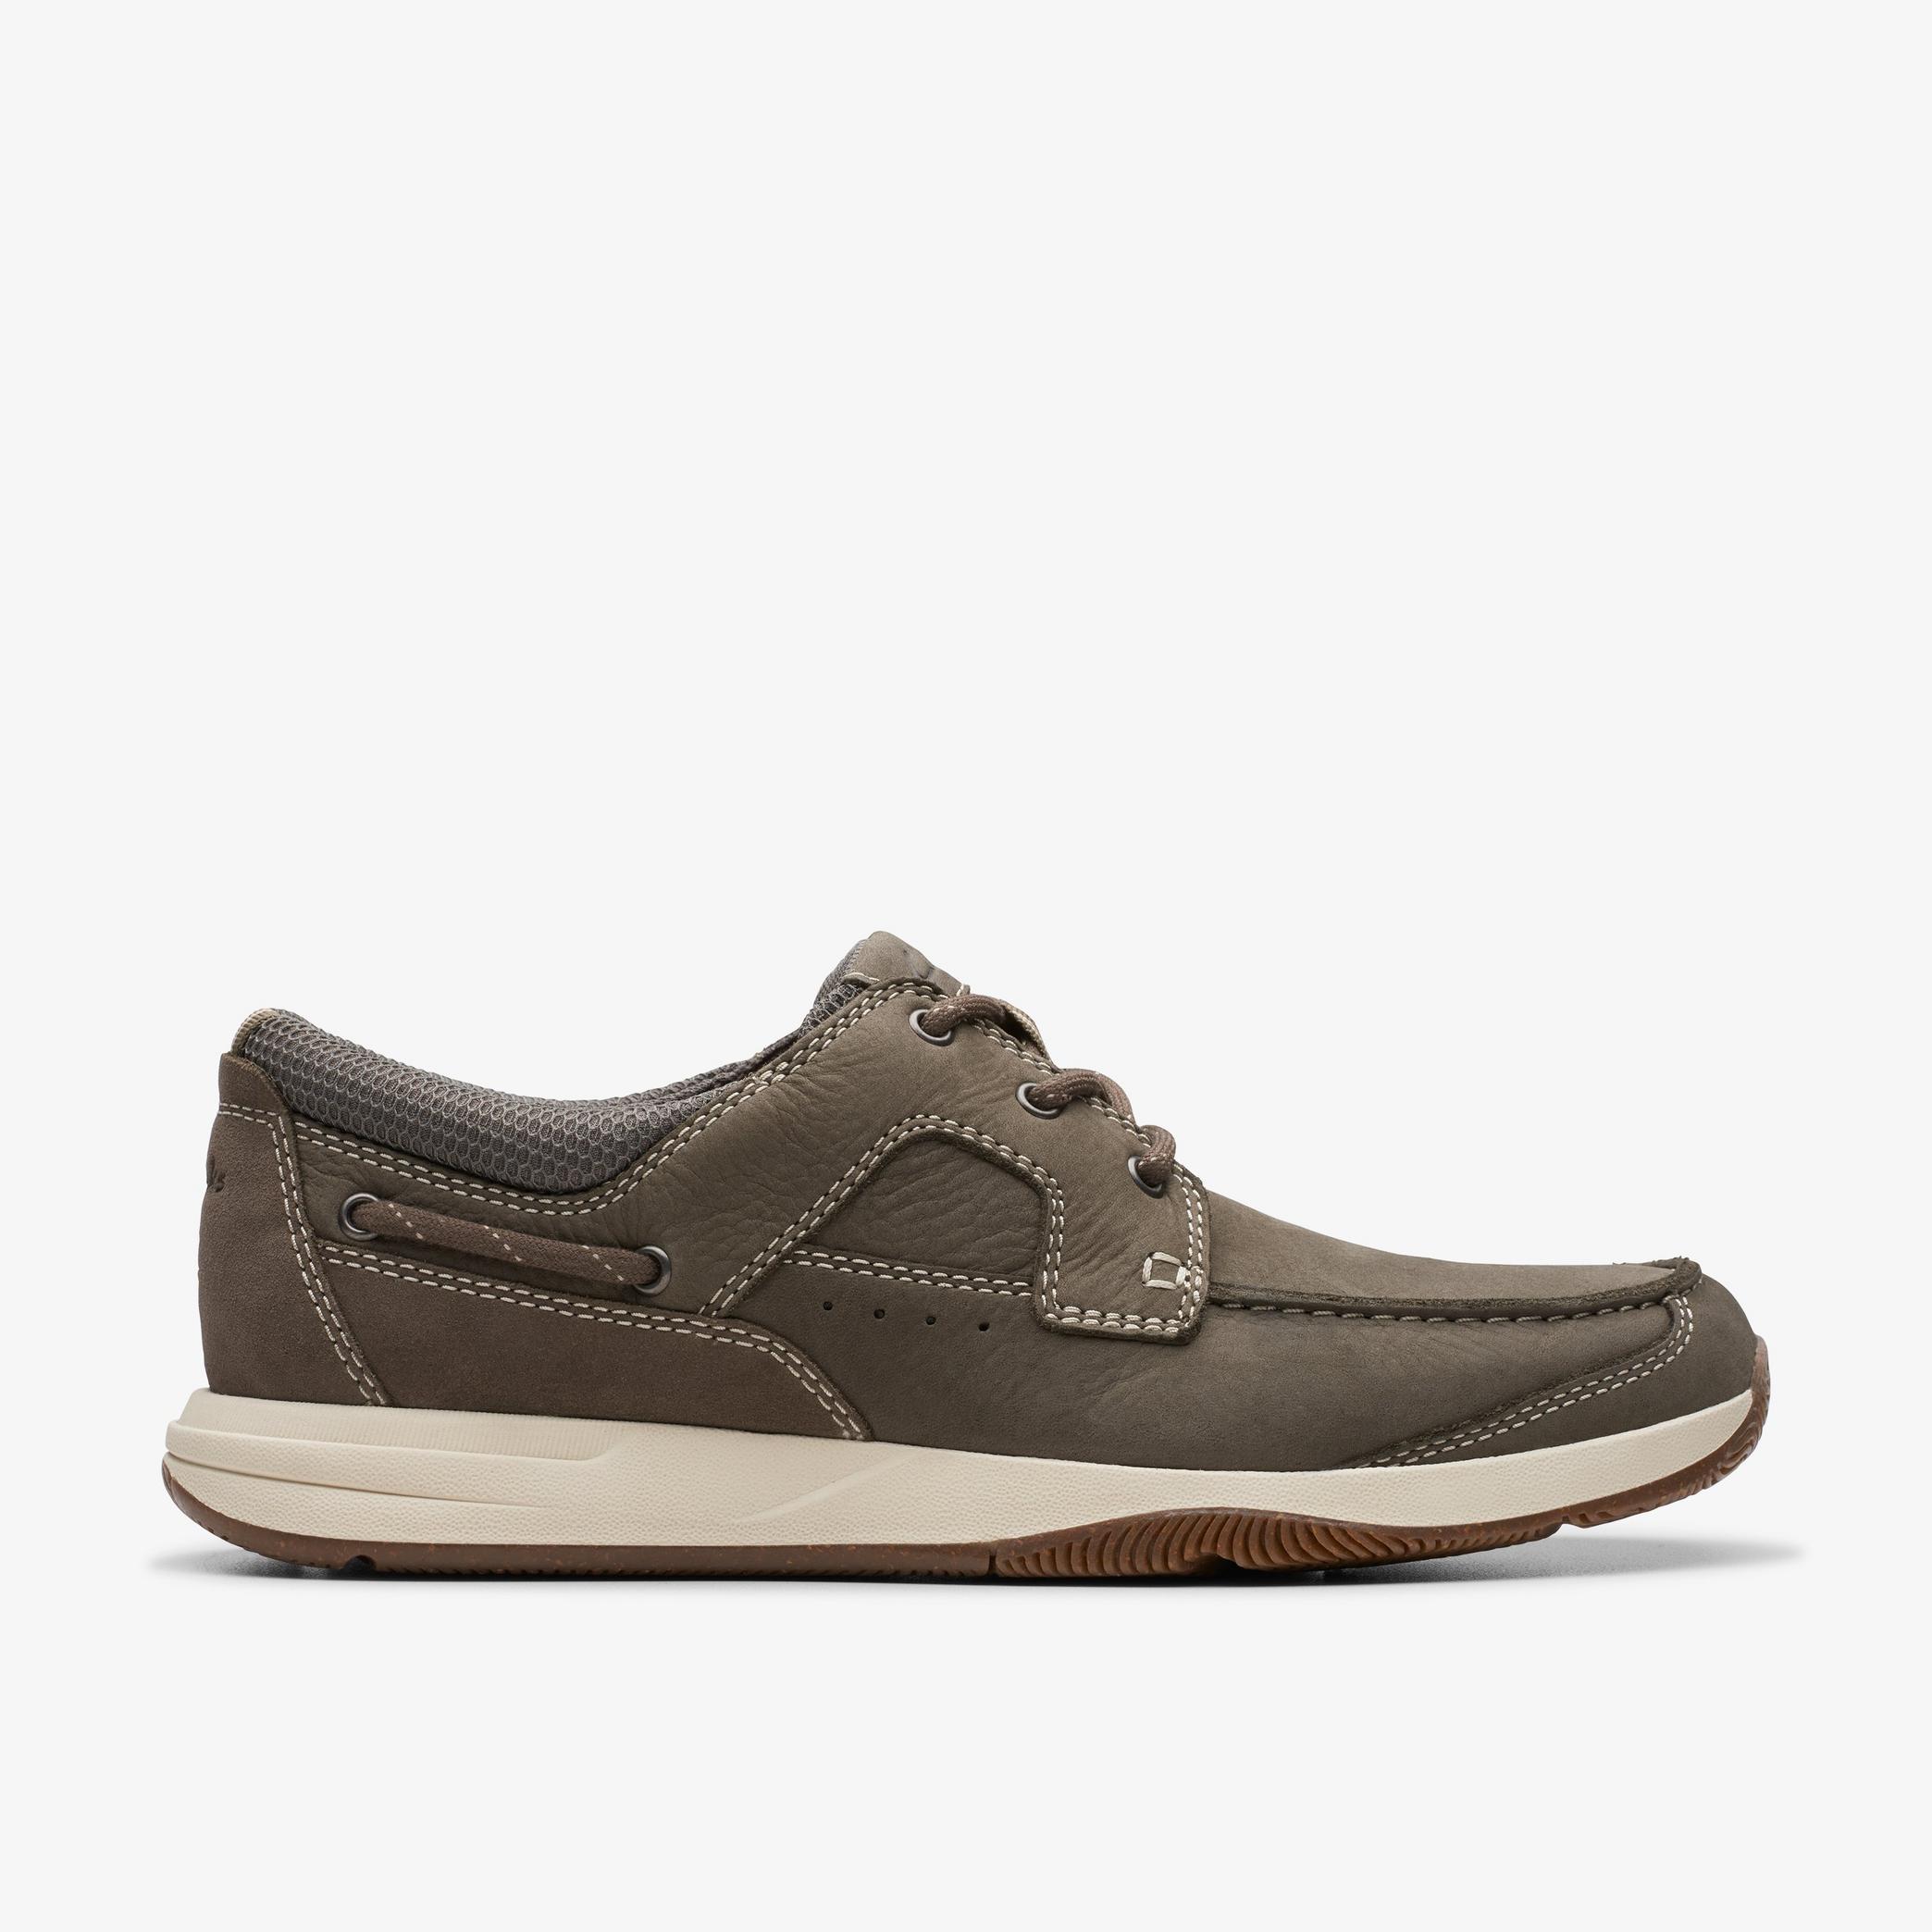 Sailview Lace Taupe Nubuck Boat Shoes, view 1 of 8